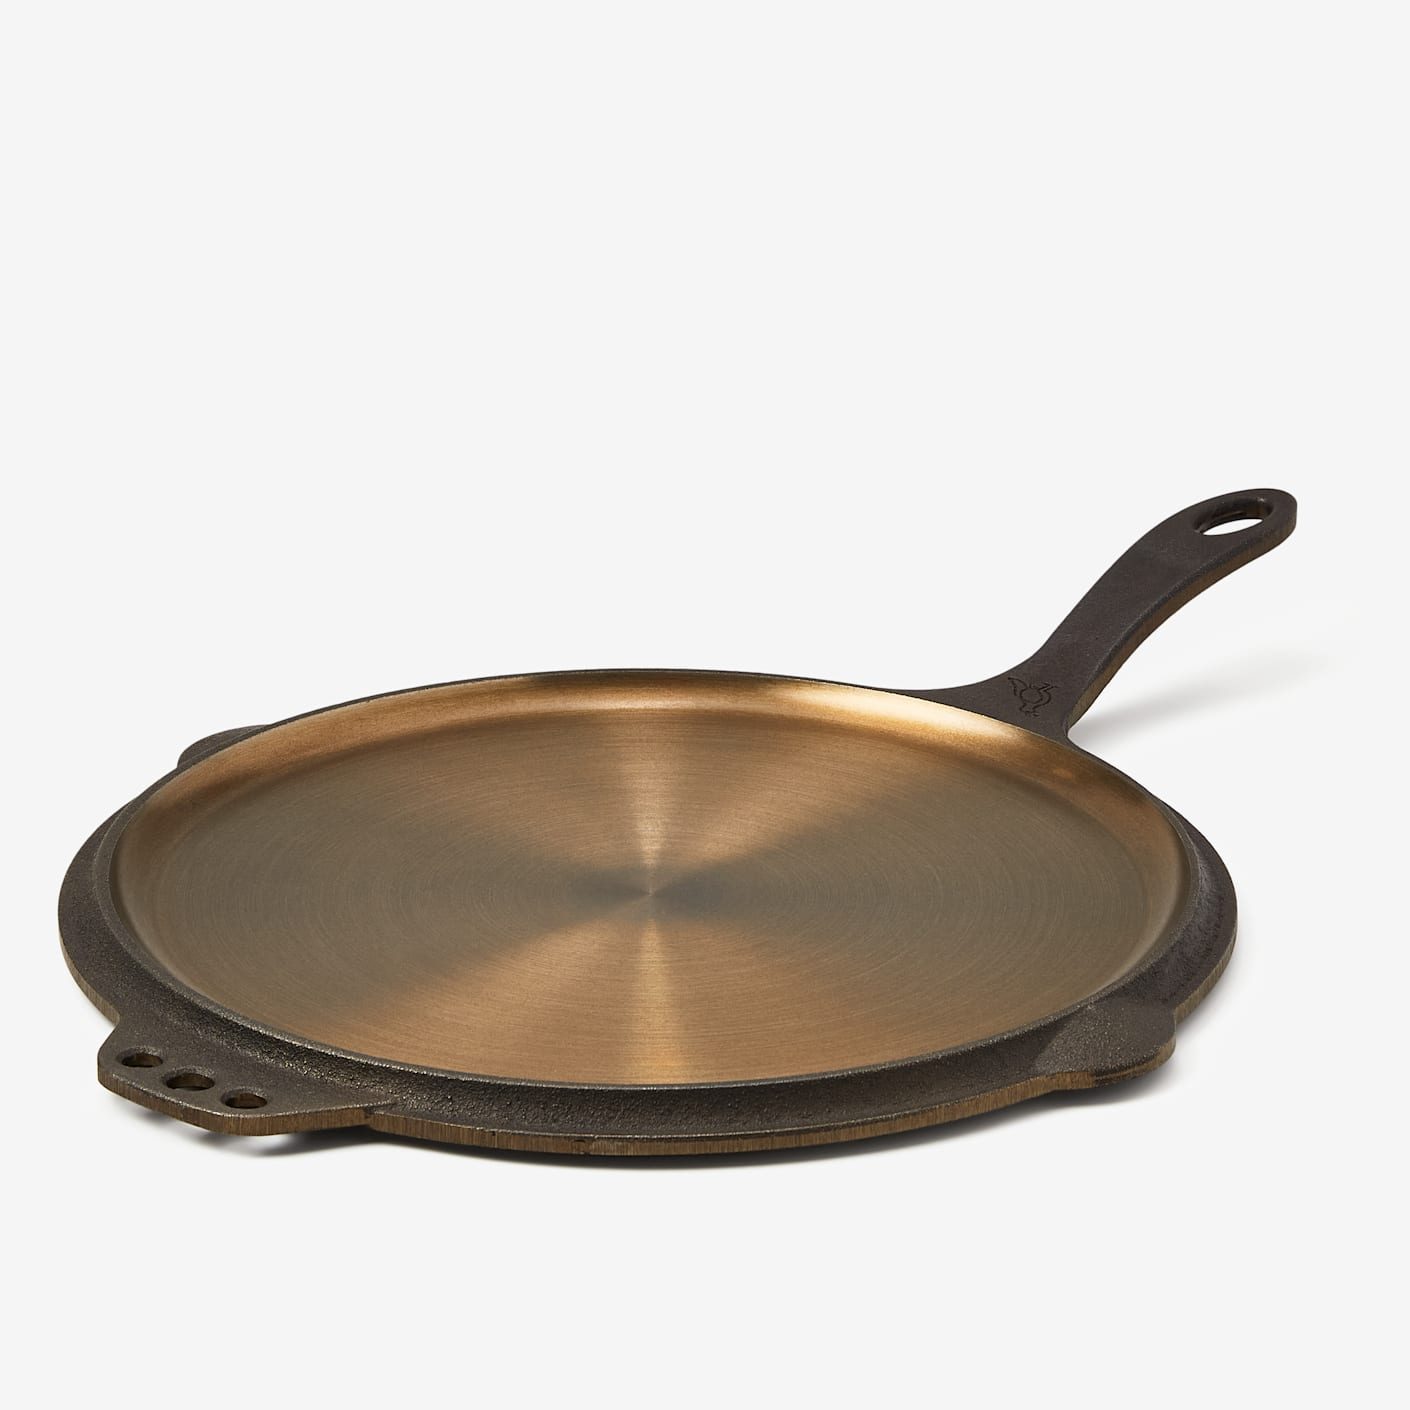 https://dam.bespokepost.com/image/upload/c_limit,dpr_auto,f_auto,q_auto,w_1410/v1/Storefront/2023/02-february/in-house/smithey-ironware-no.-12-flat-top-griddle_1